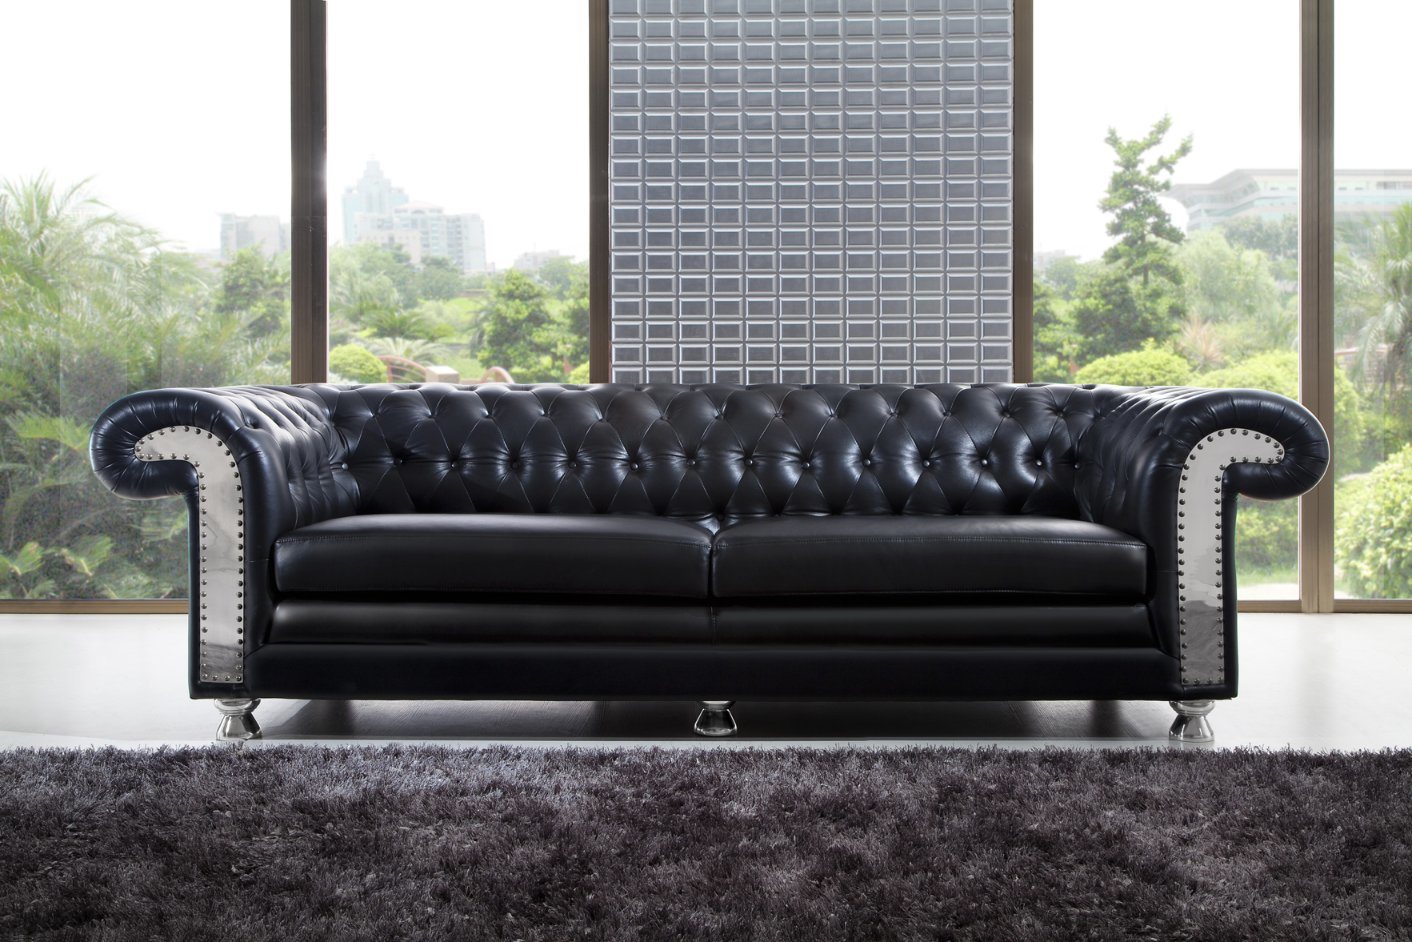 Black Leather Button Sofa 3-Seaters, Stainless Steel Legs Sofa Yh-136